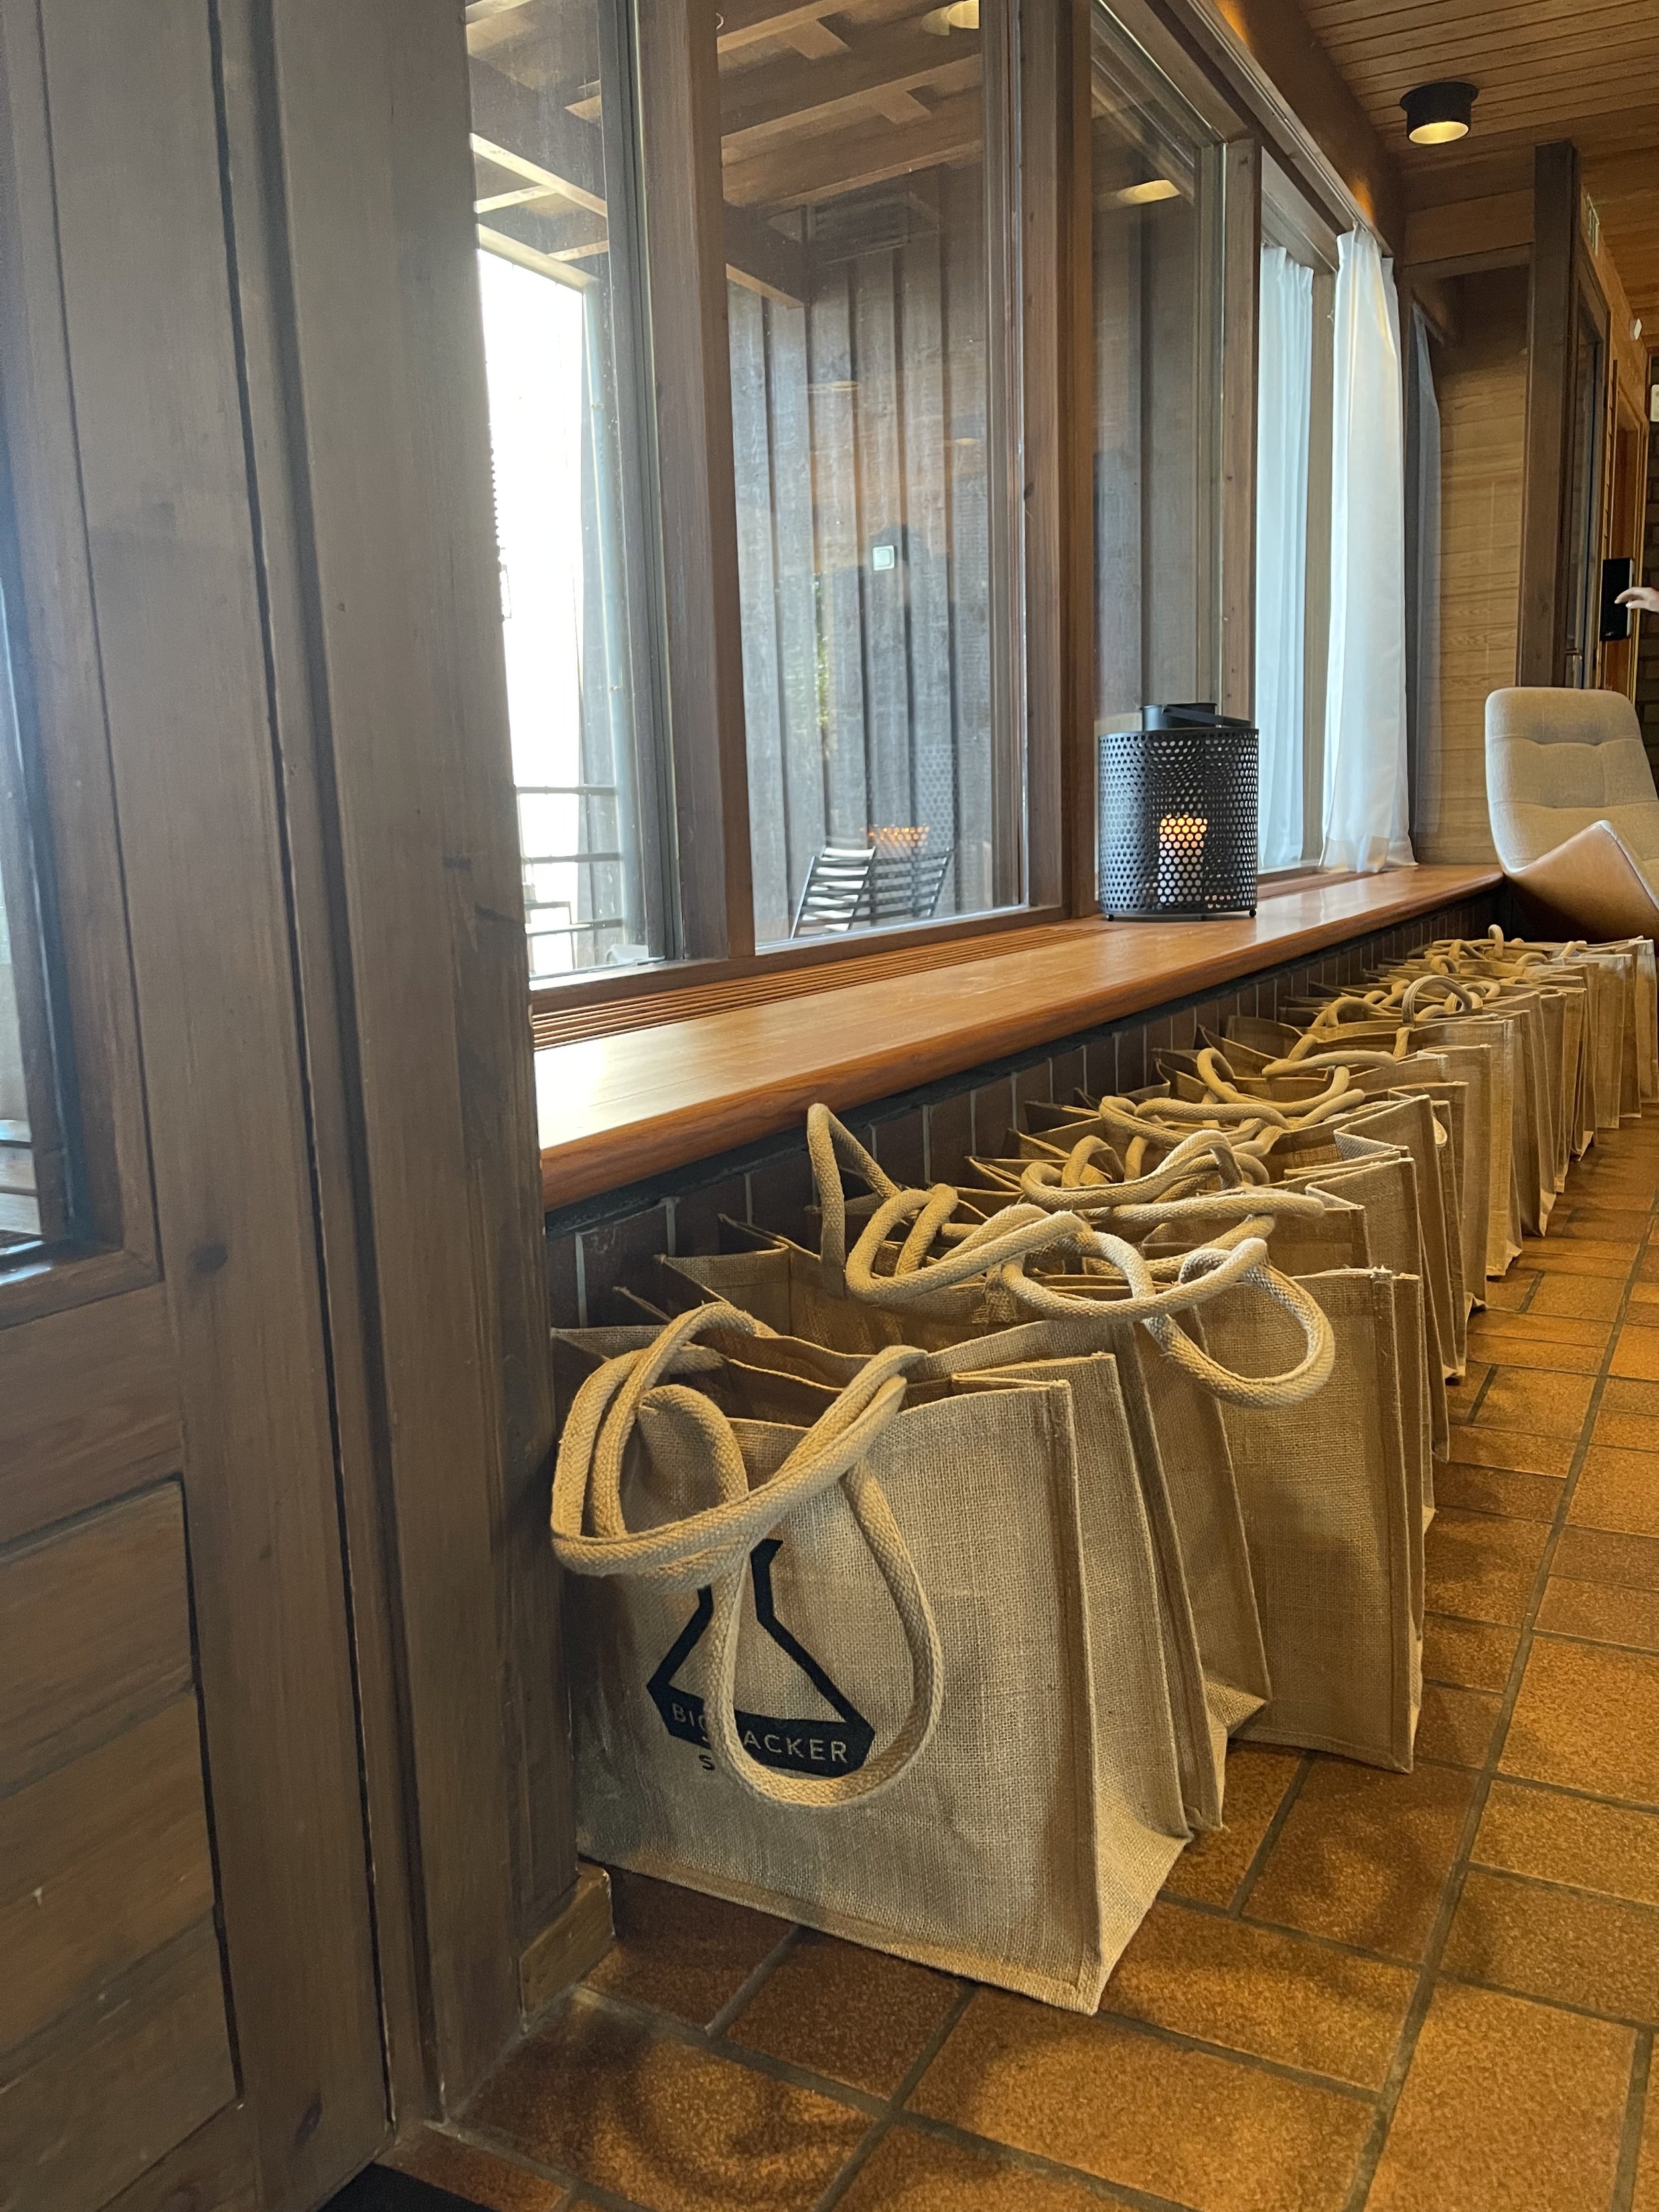 Goodie bags for participants